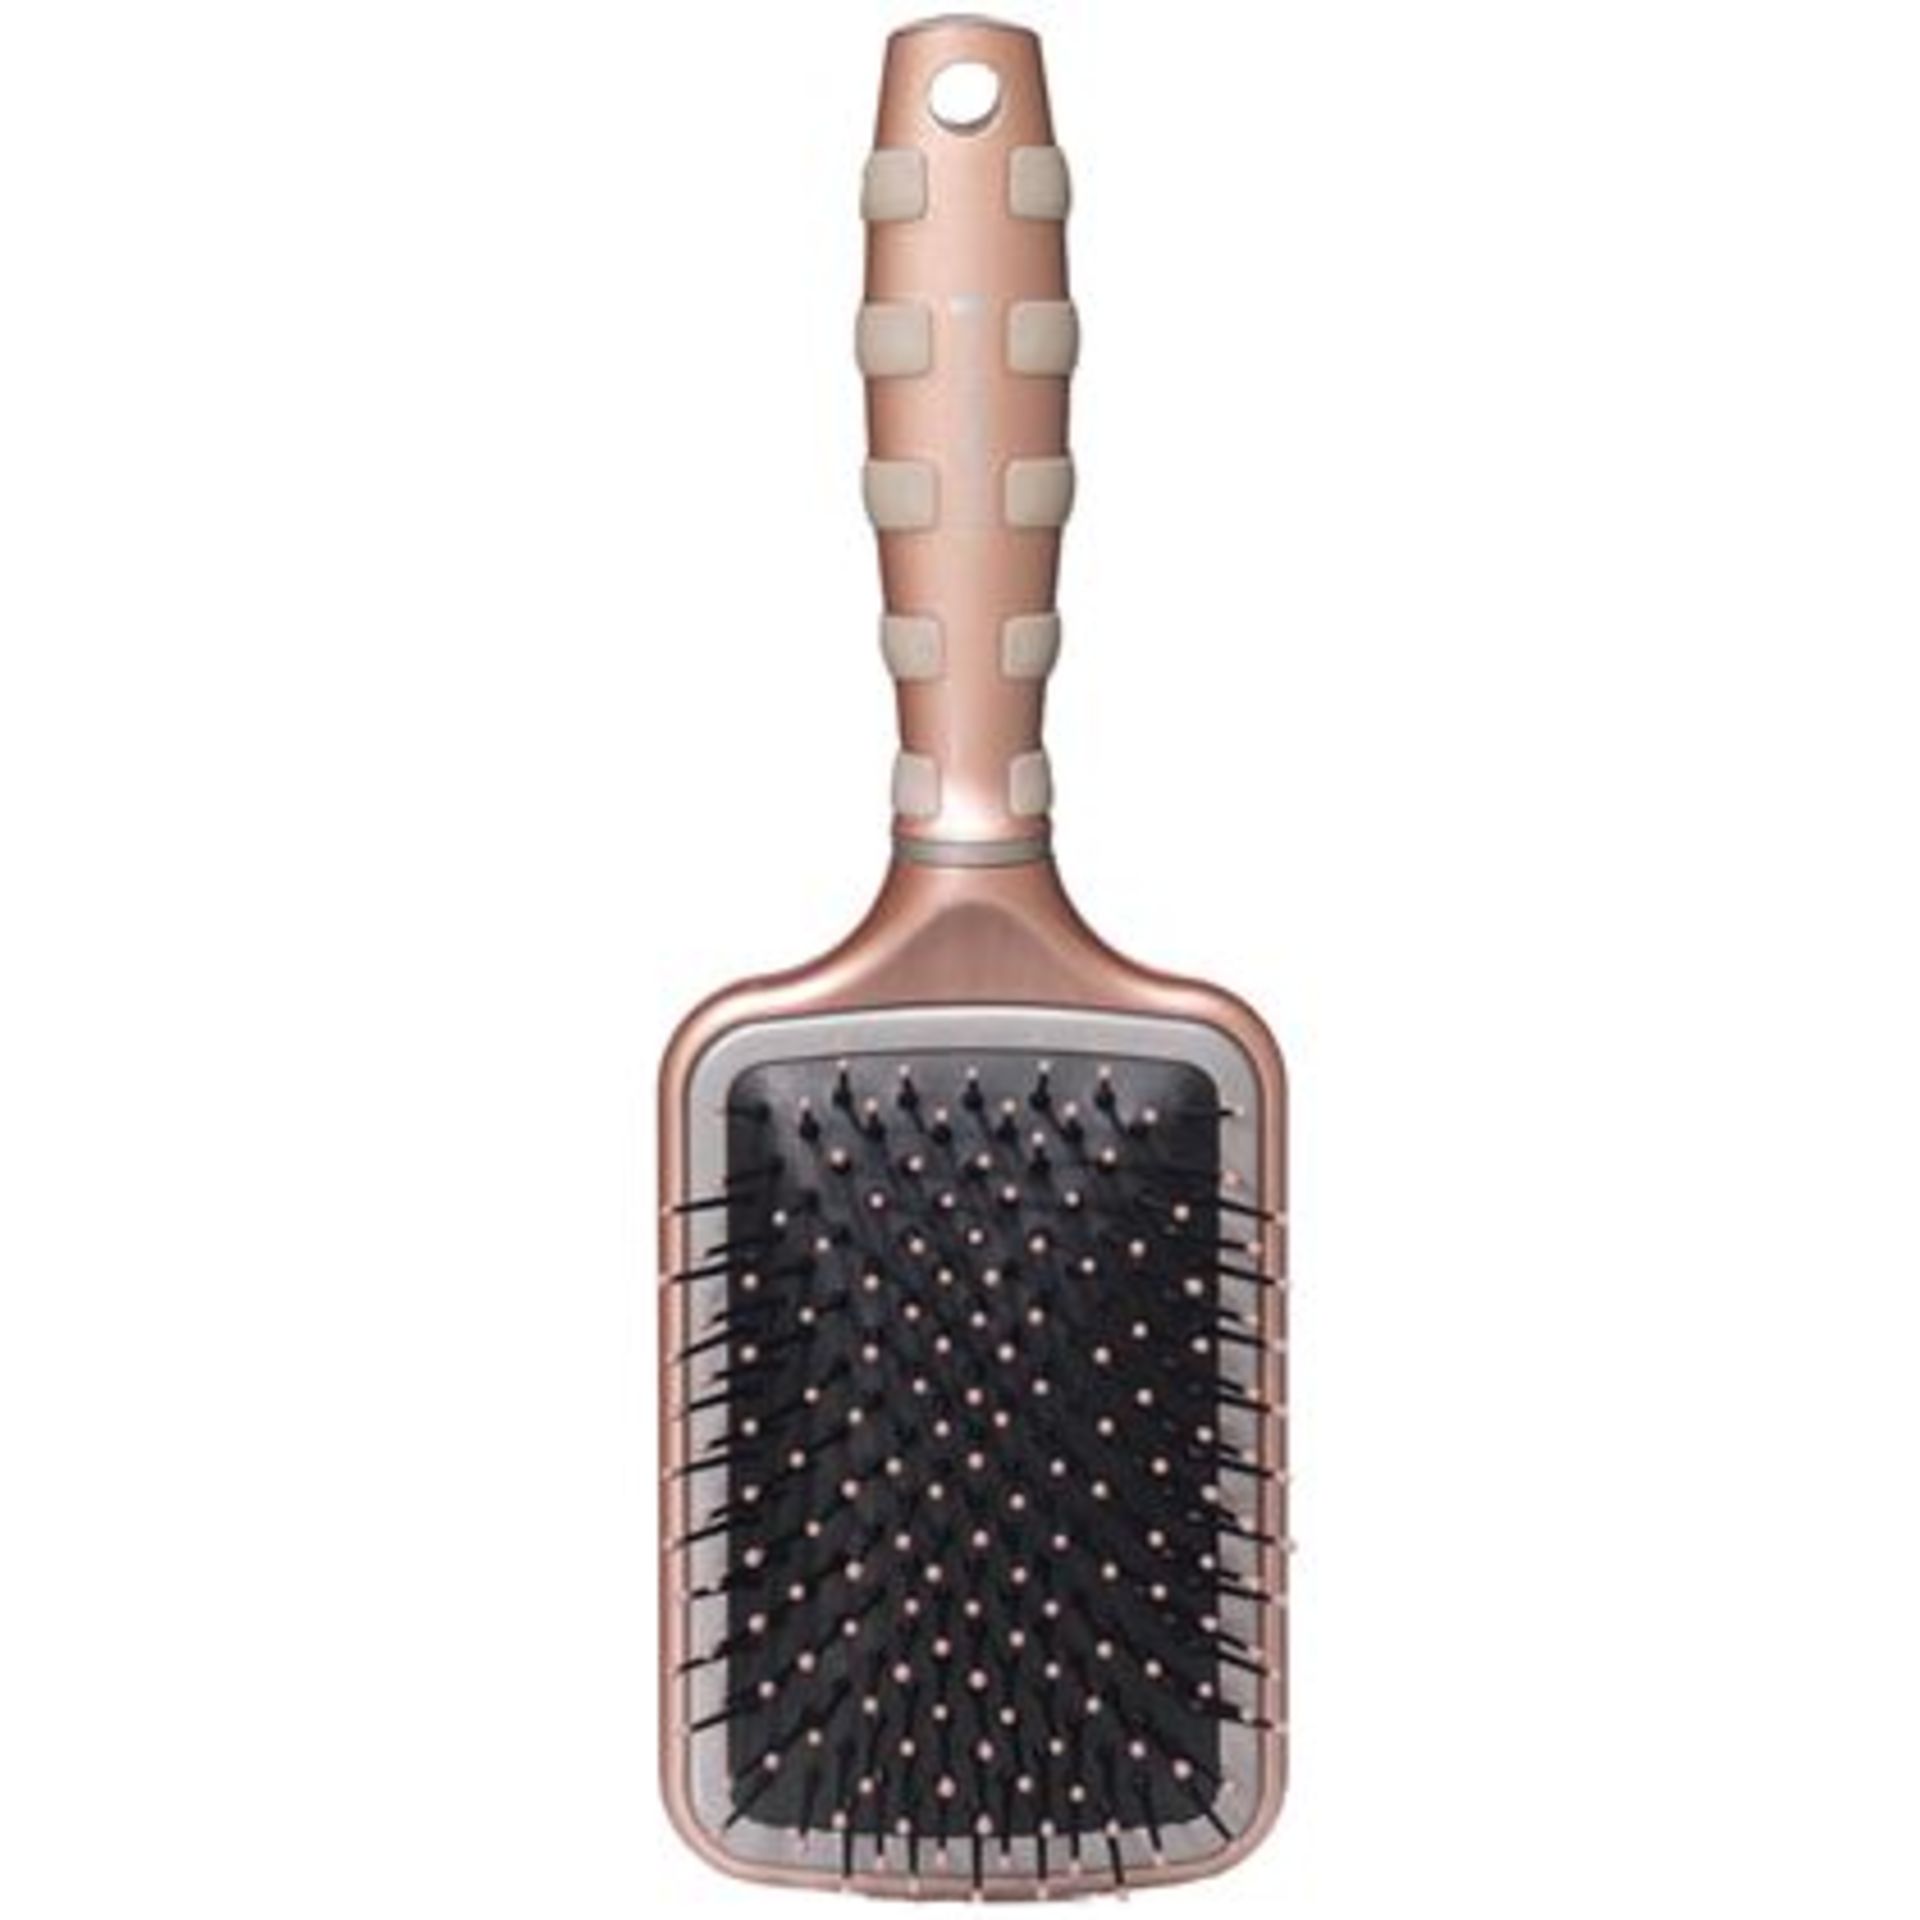 V *TRADE QTY* Brand New Remington Keratin Therapy Paddle Hair Brush For Sleek Straight Styles With